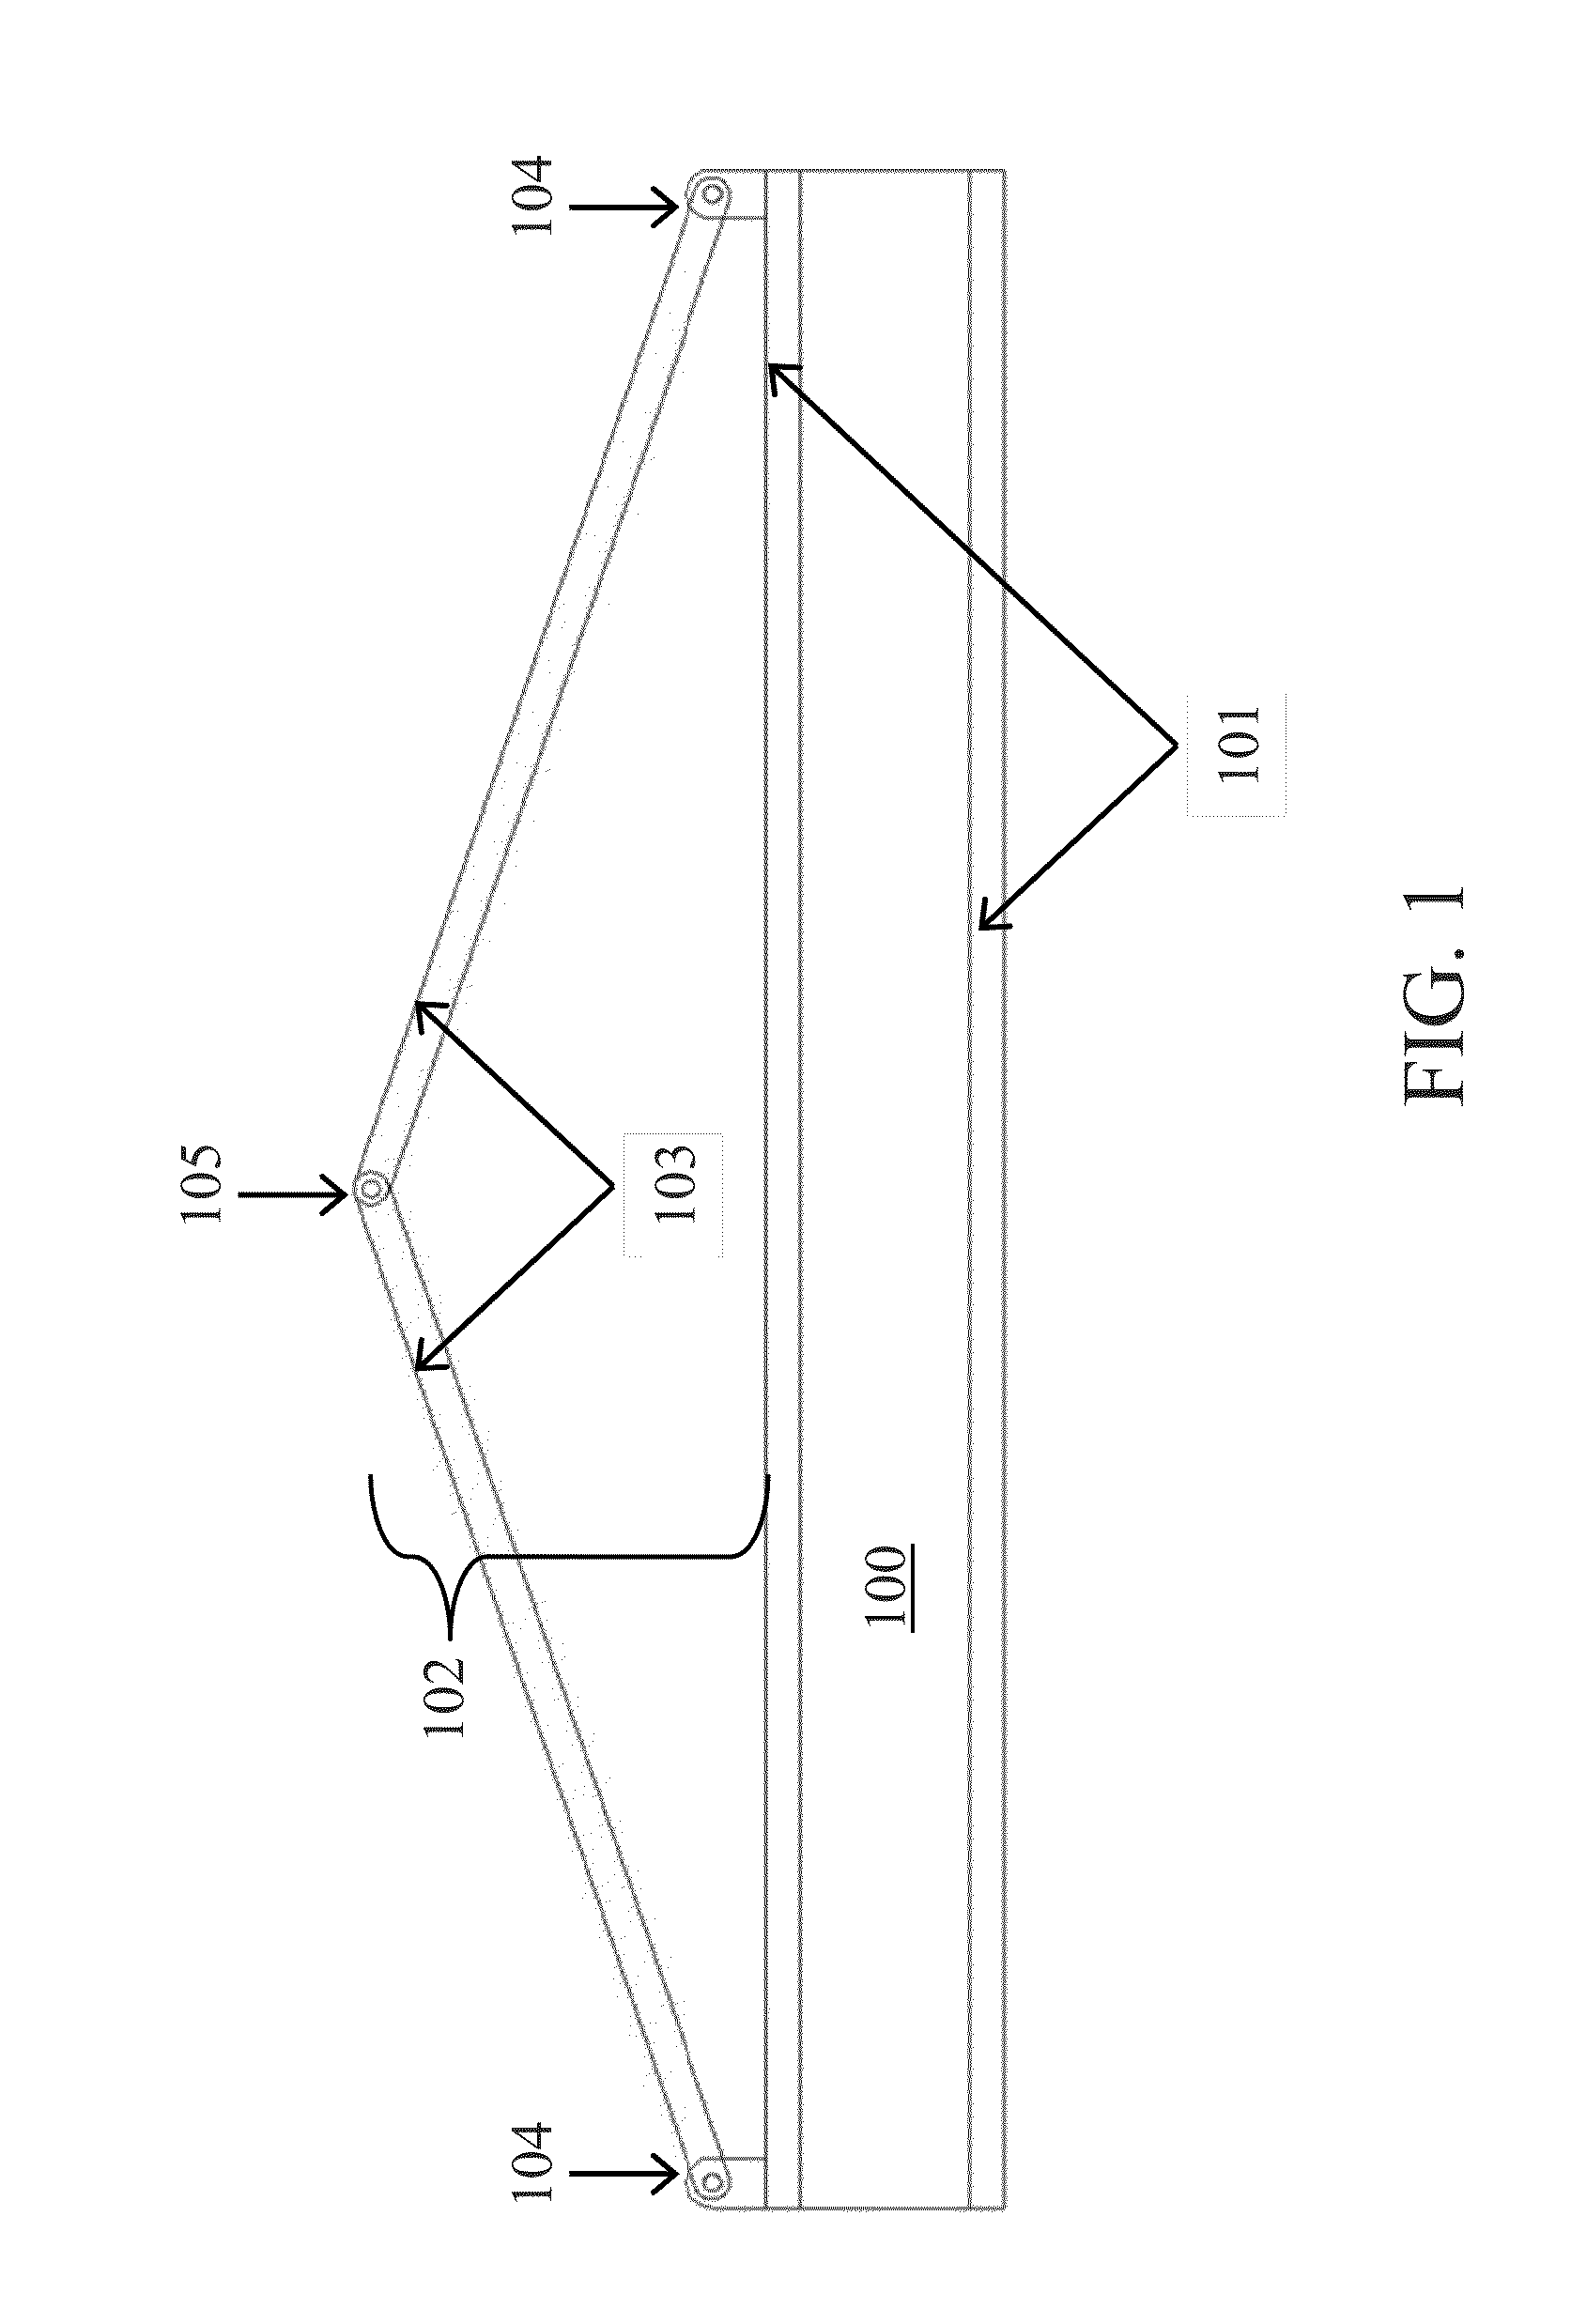 Devices, methods, and systems for high-resolution tactile displays